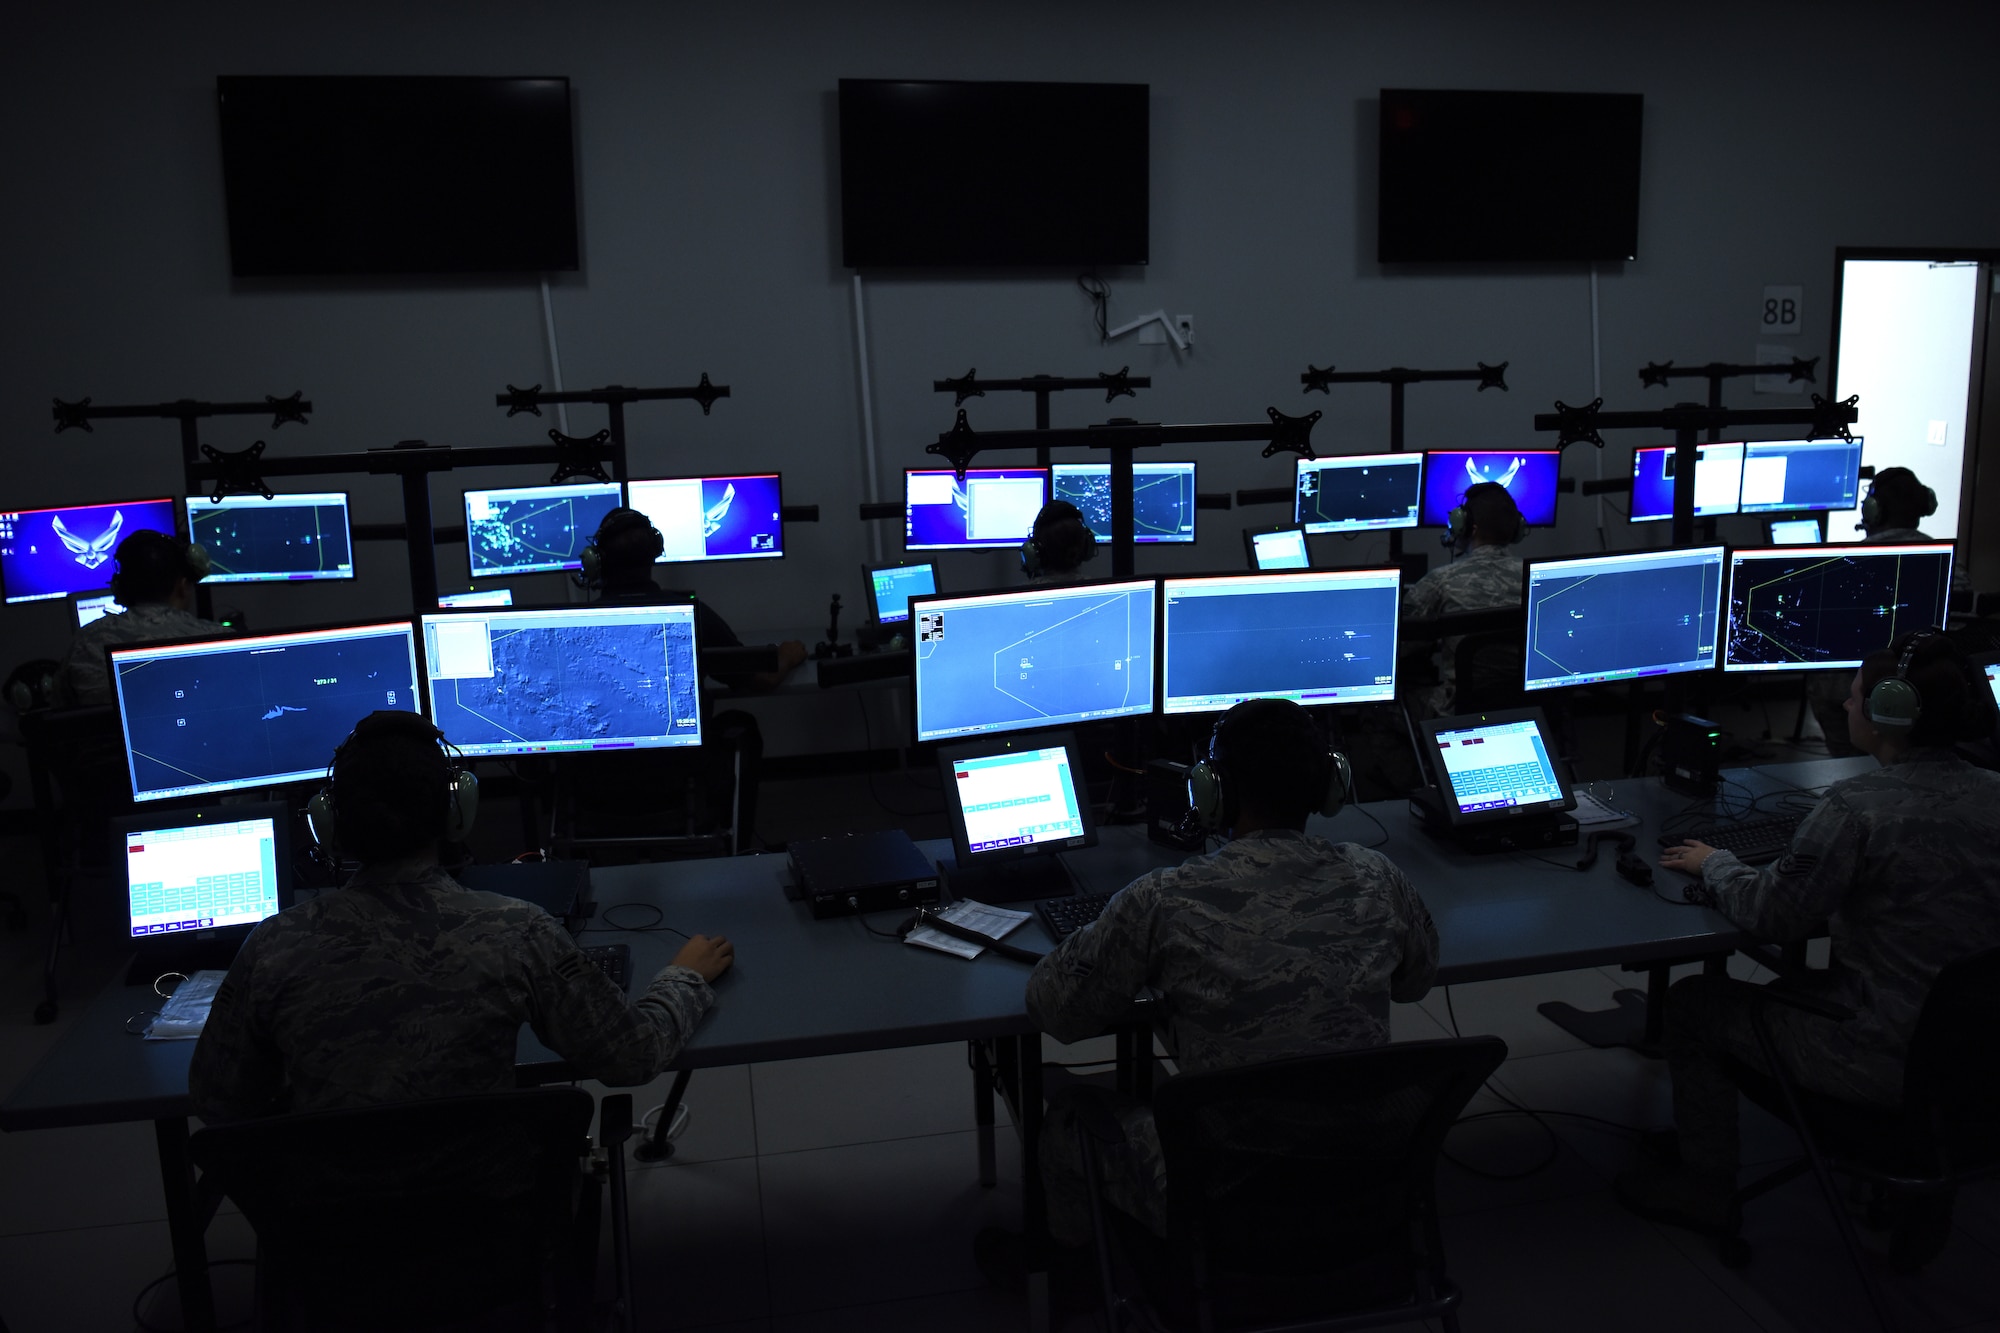 Airmen assigned to the 607th Air Control Squadron run simulations on the Battlespace Command and Control Center simulator, Sept. 21, 2018 at Luke Air Force Base, Ariz.